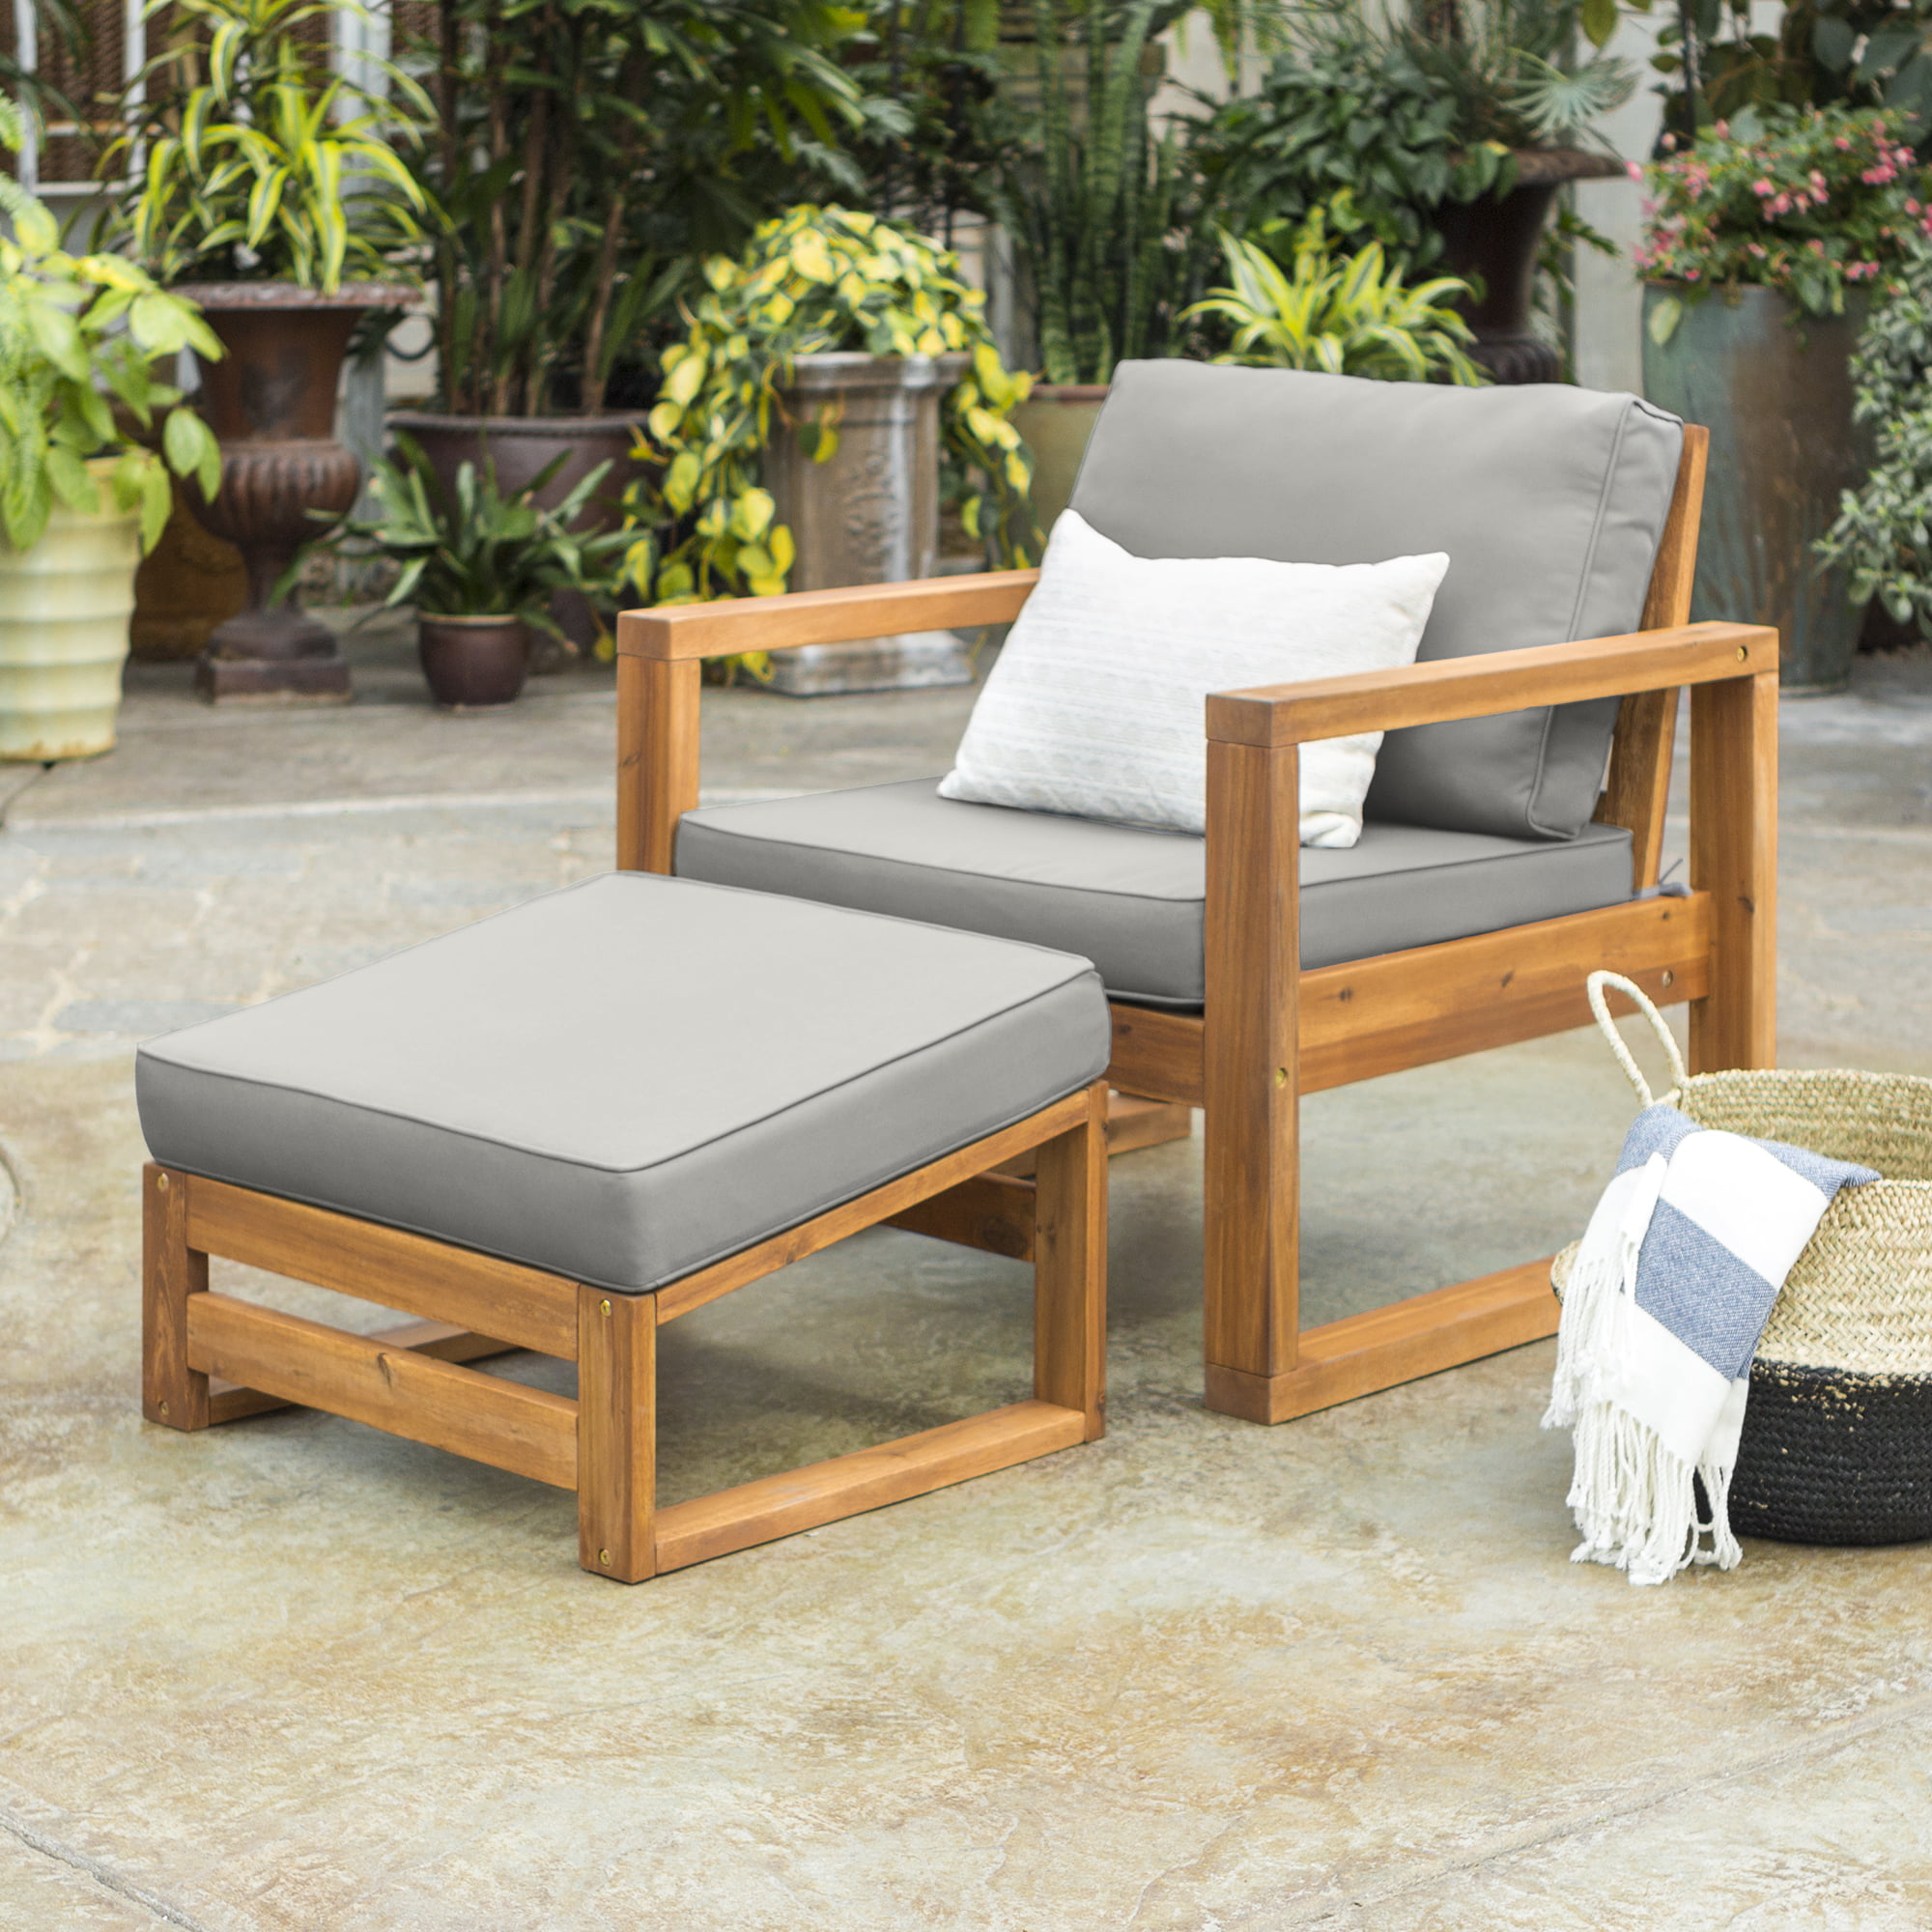 Manor Park Outdoor Patio Chair And, Manor Park Outdoor Wood Patio Chairs With Cushions